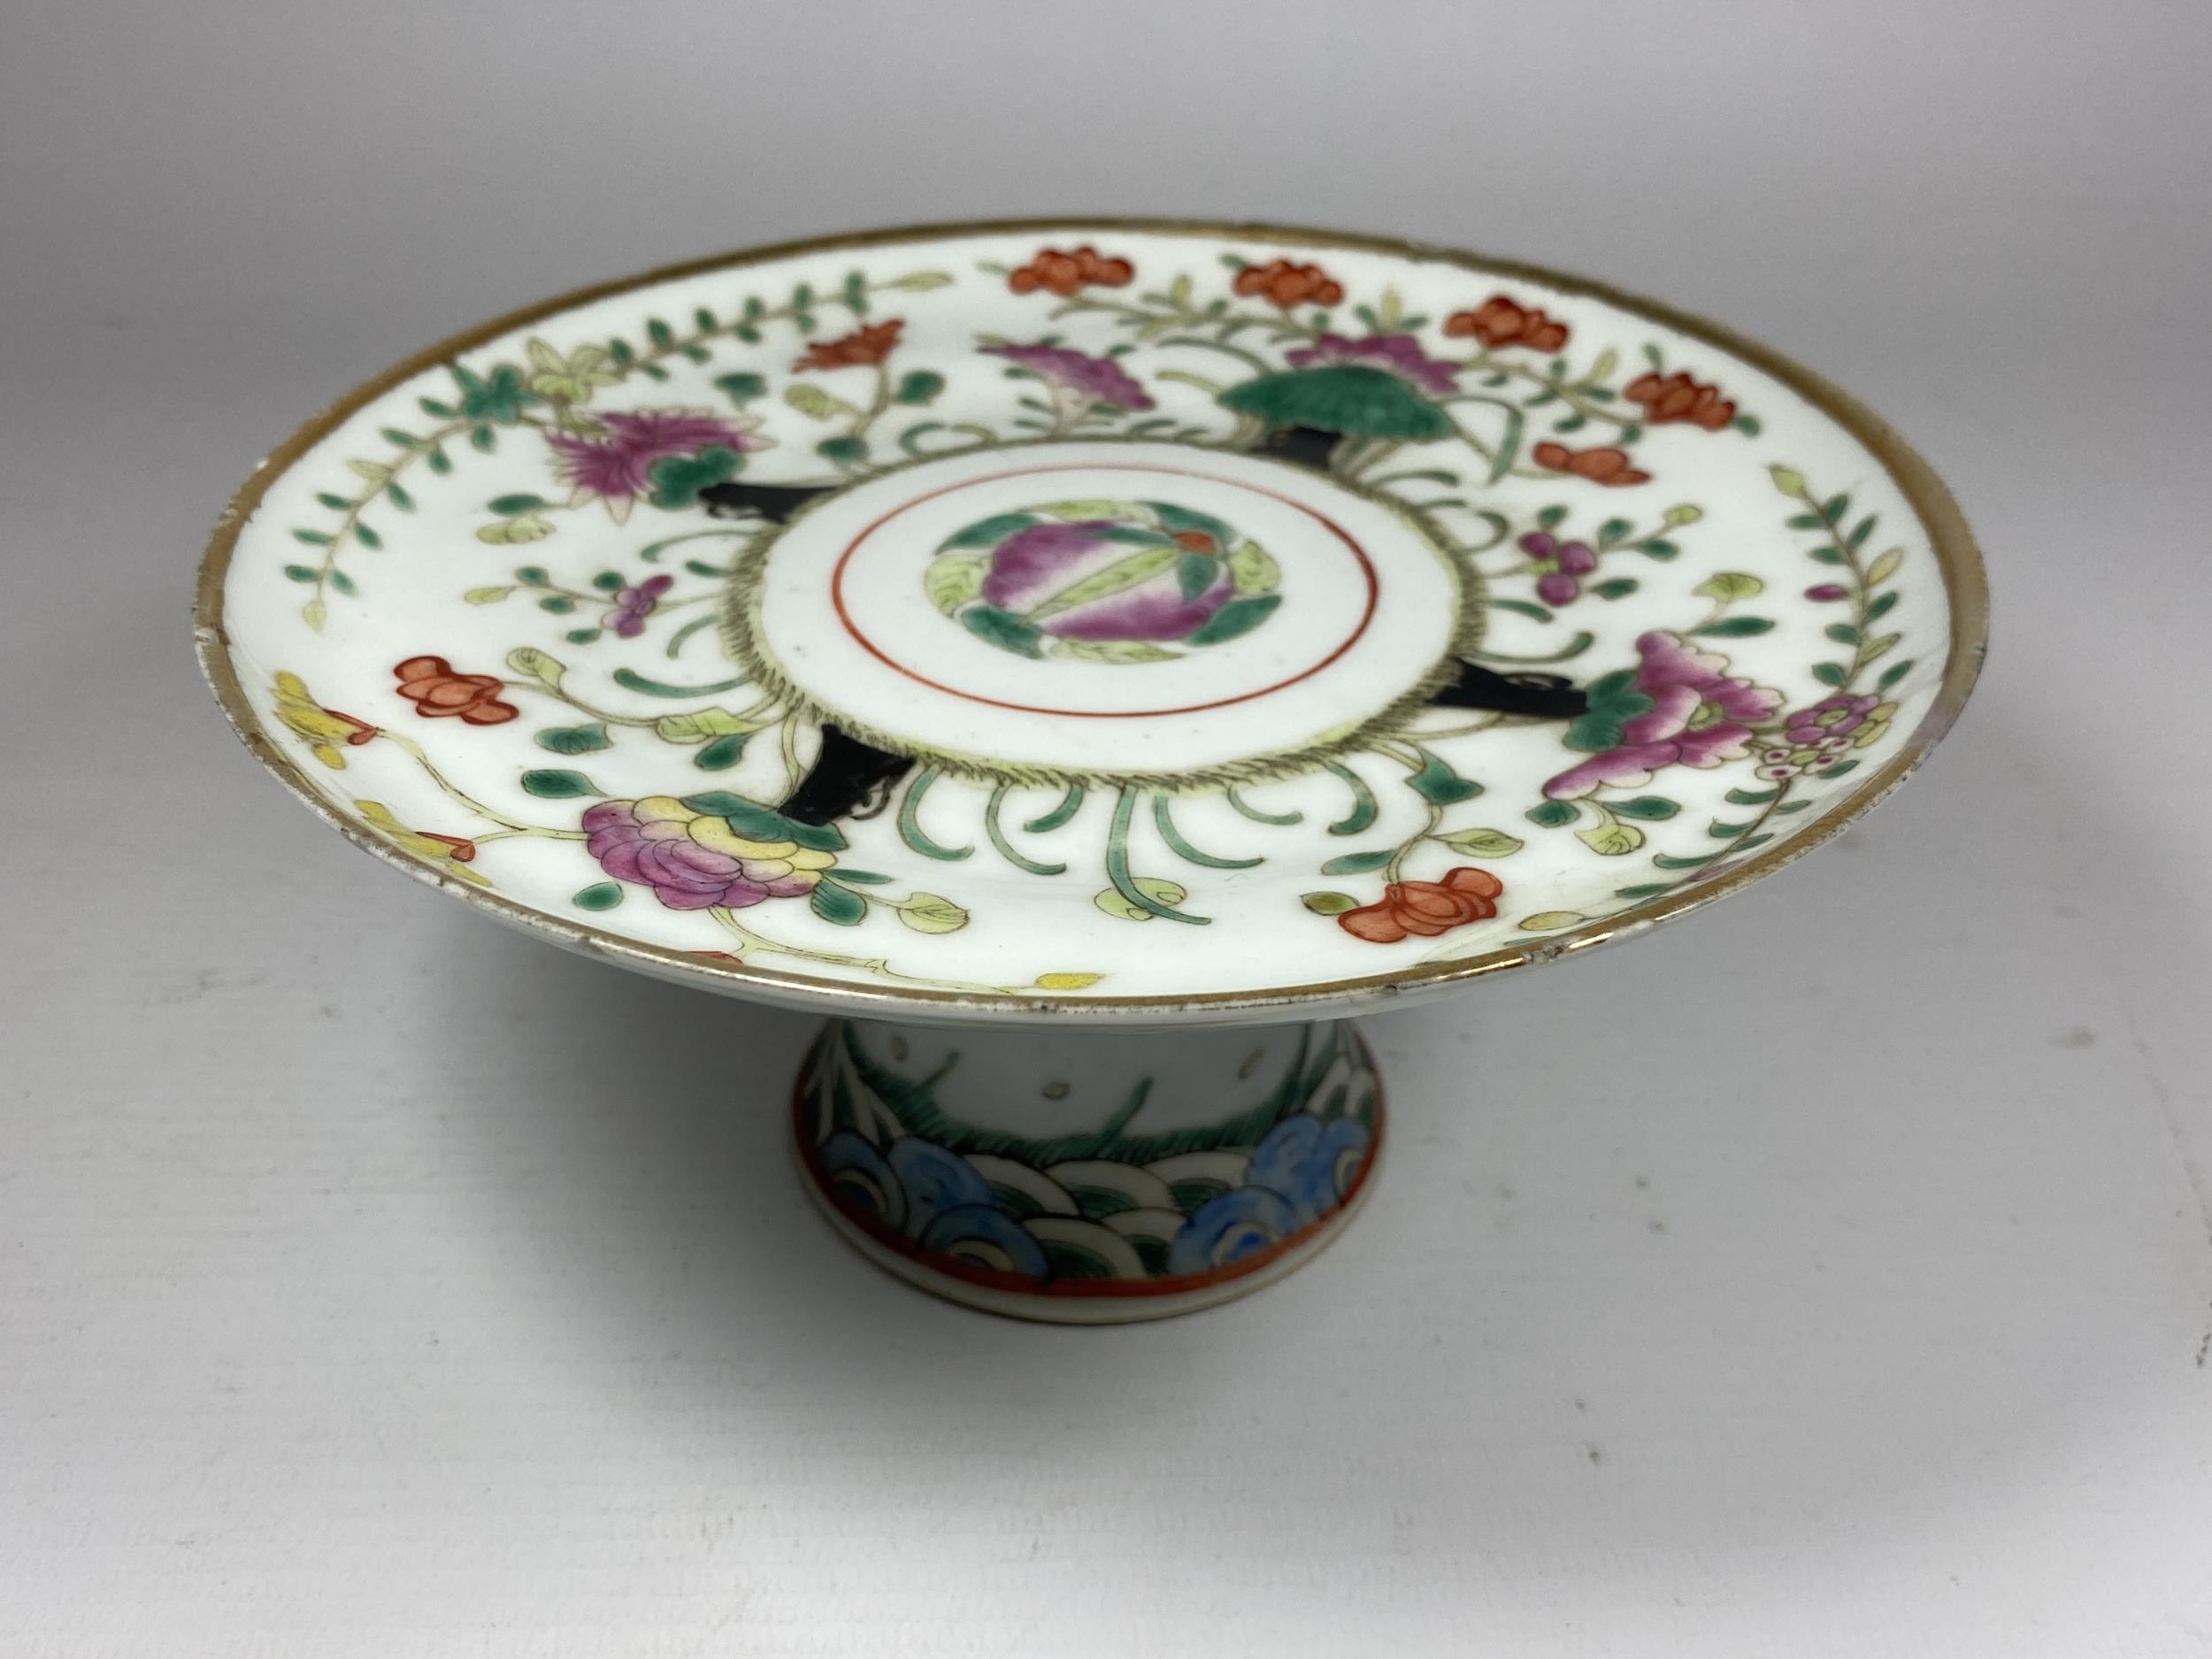 A CHINESE QING PORCELAIN TAZZA / PEDESTAL STAND WITH ENAMELLED FLORAL DESIGN, DIAMETER 18CM (A/F)